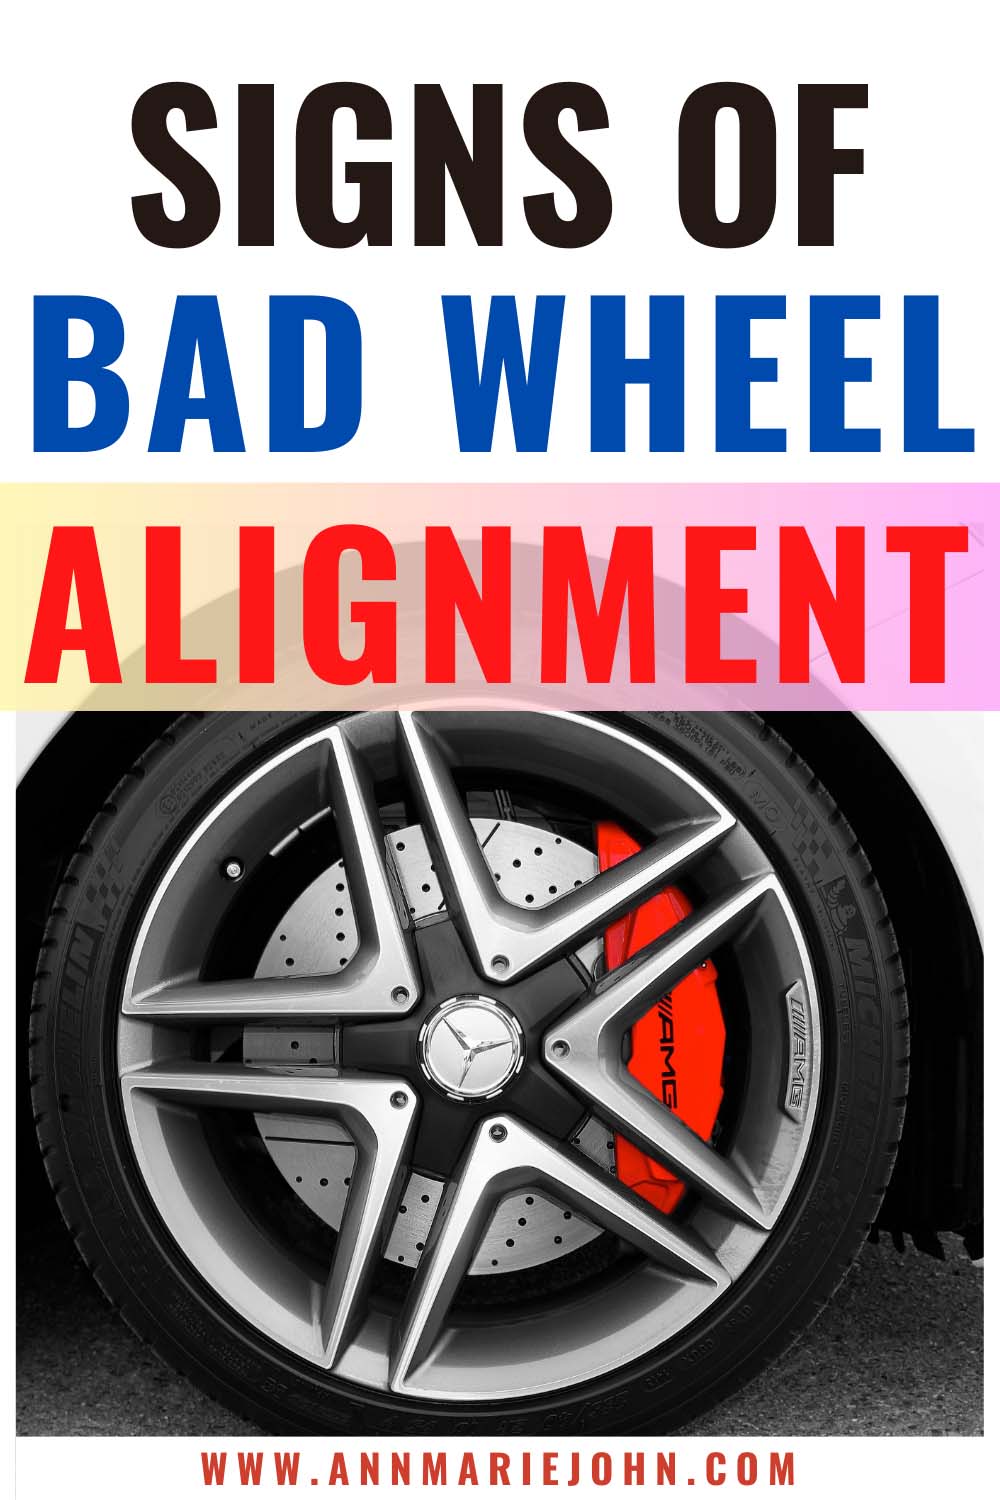 Signs of Bad Wheel Alignment